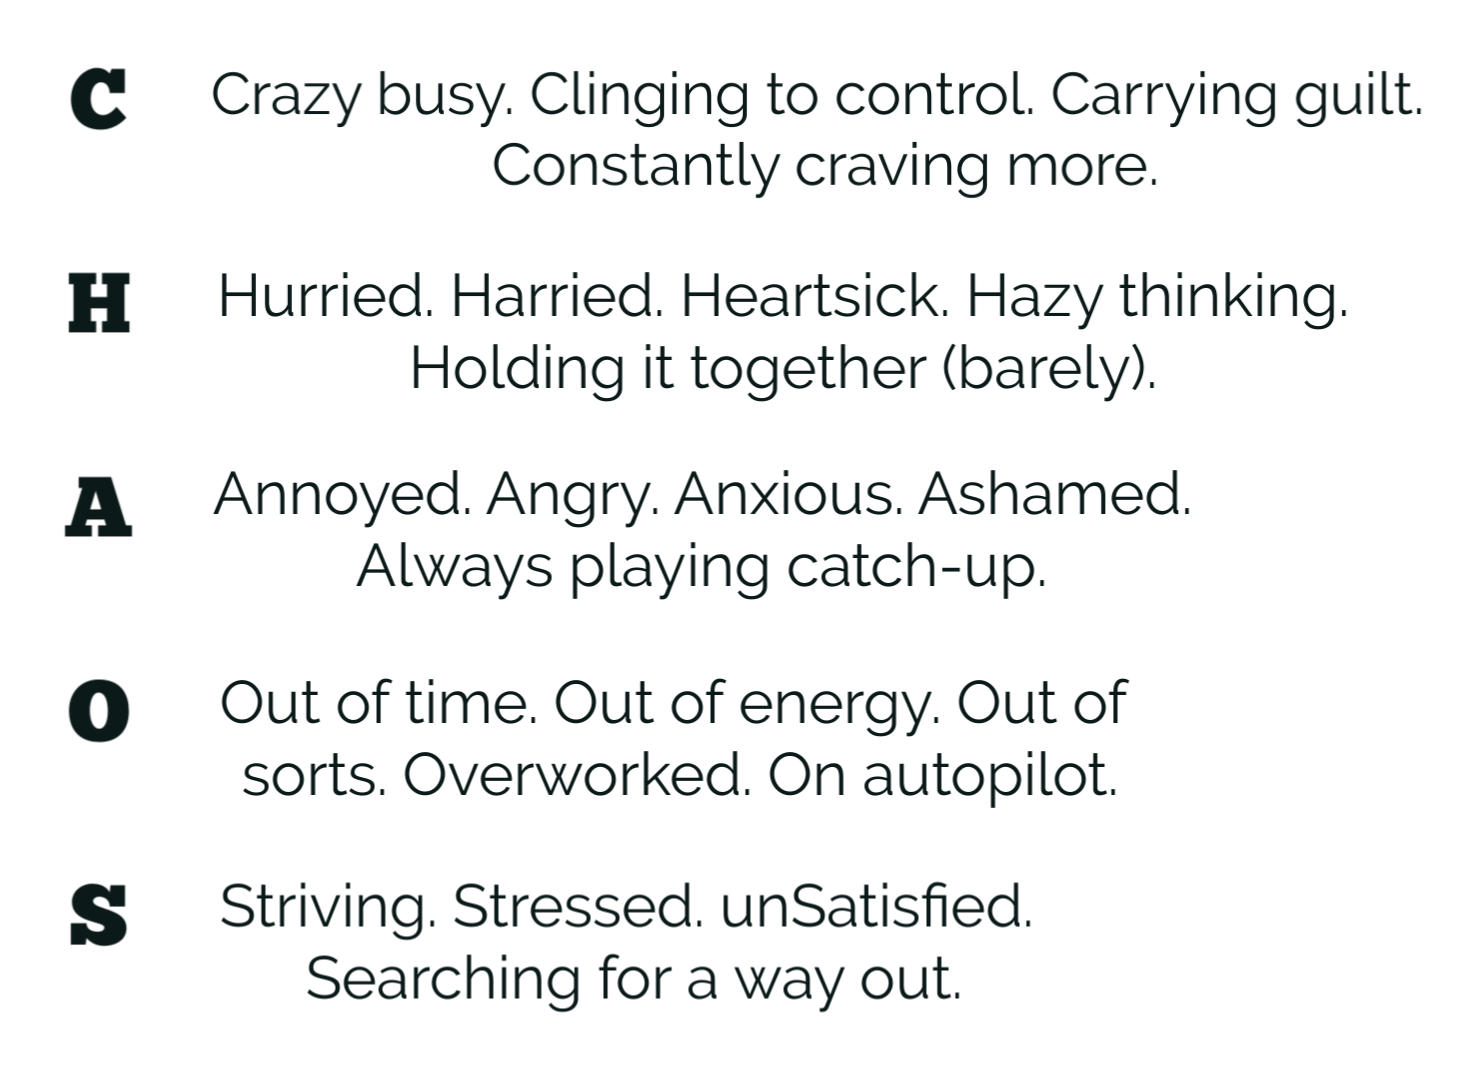 crazy busy, harried, annoyed, overworked and stressed